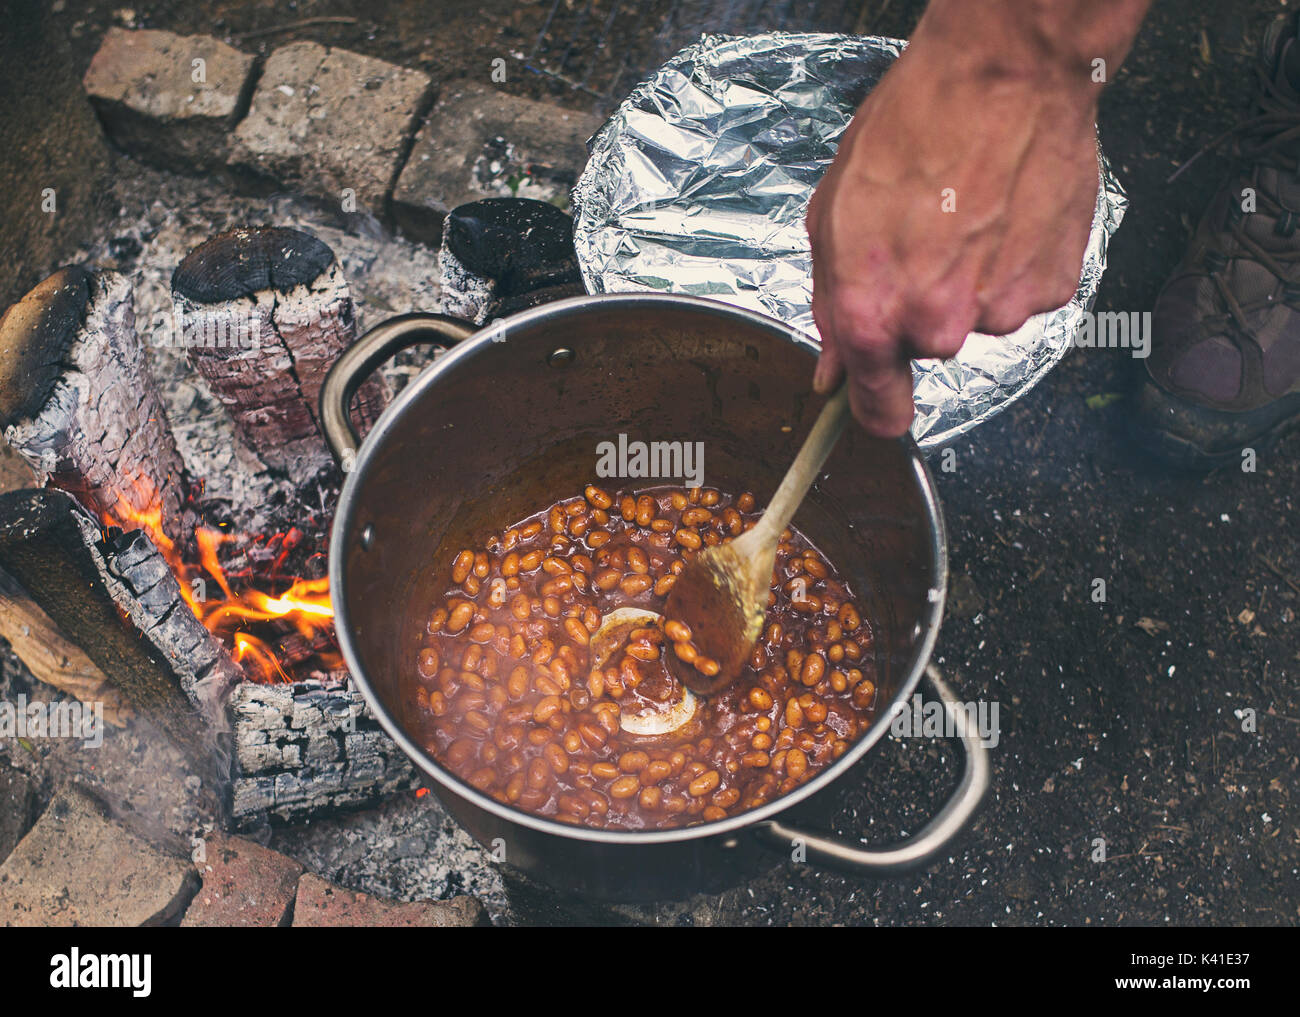 Baked beans on a campfire Stock Photo